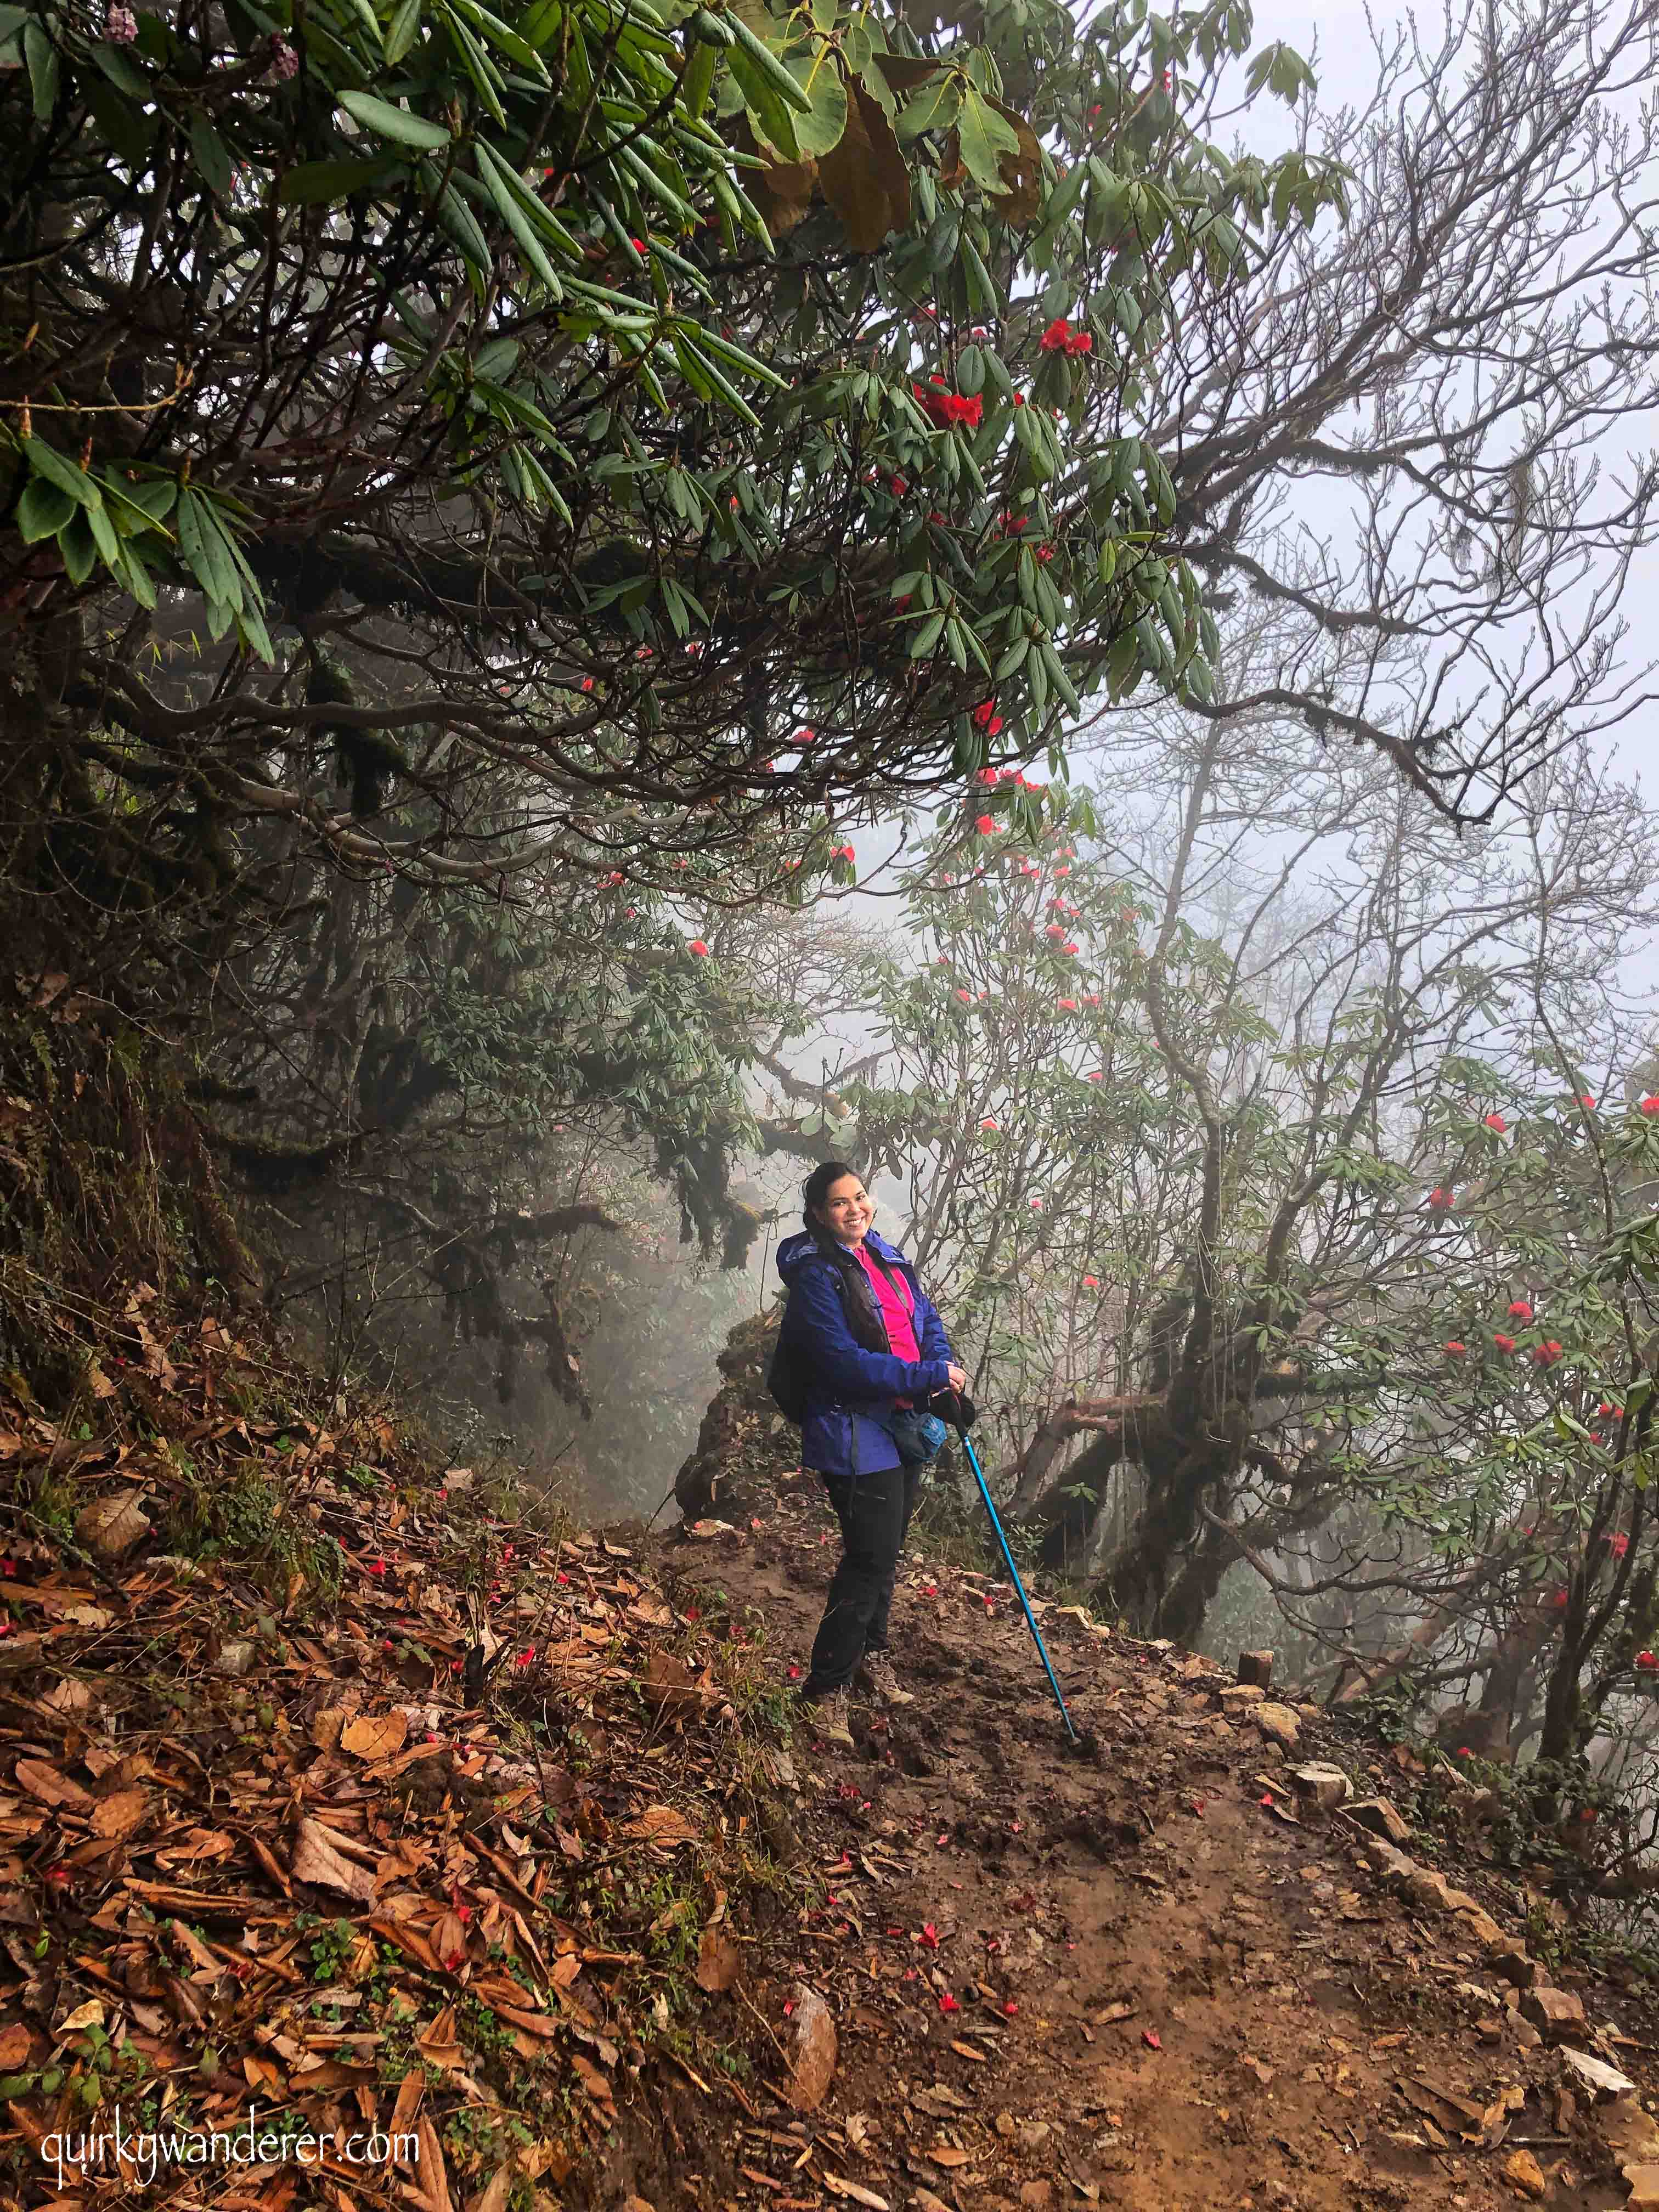 Barsey Rhododendron Sanctuary in West Sikkim is known for its diverse rhododendron forests. A five day trek through it is a must for those who love nature.